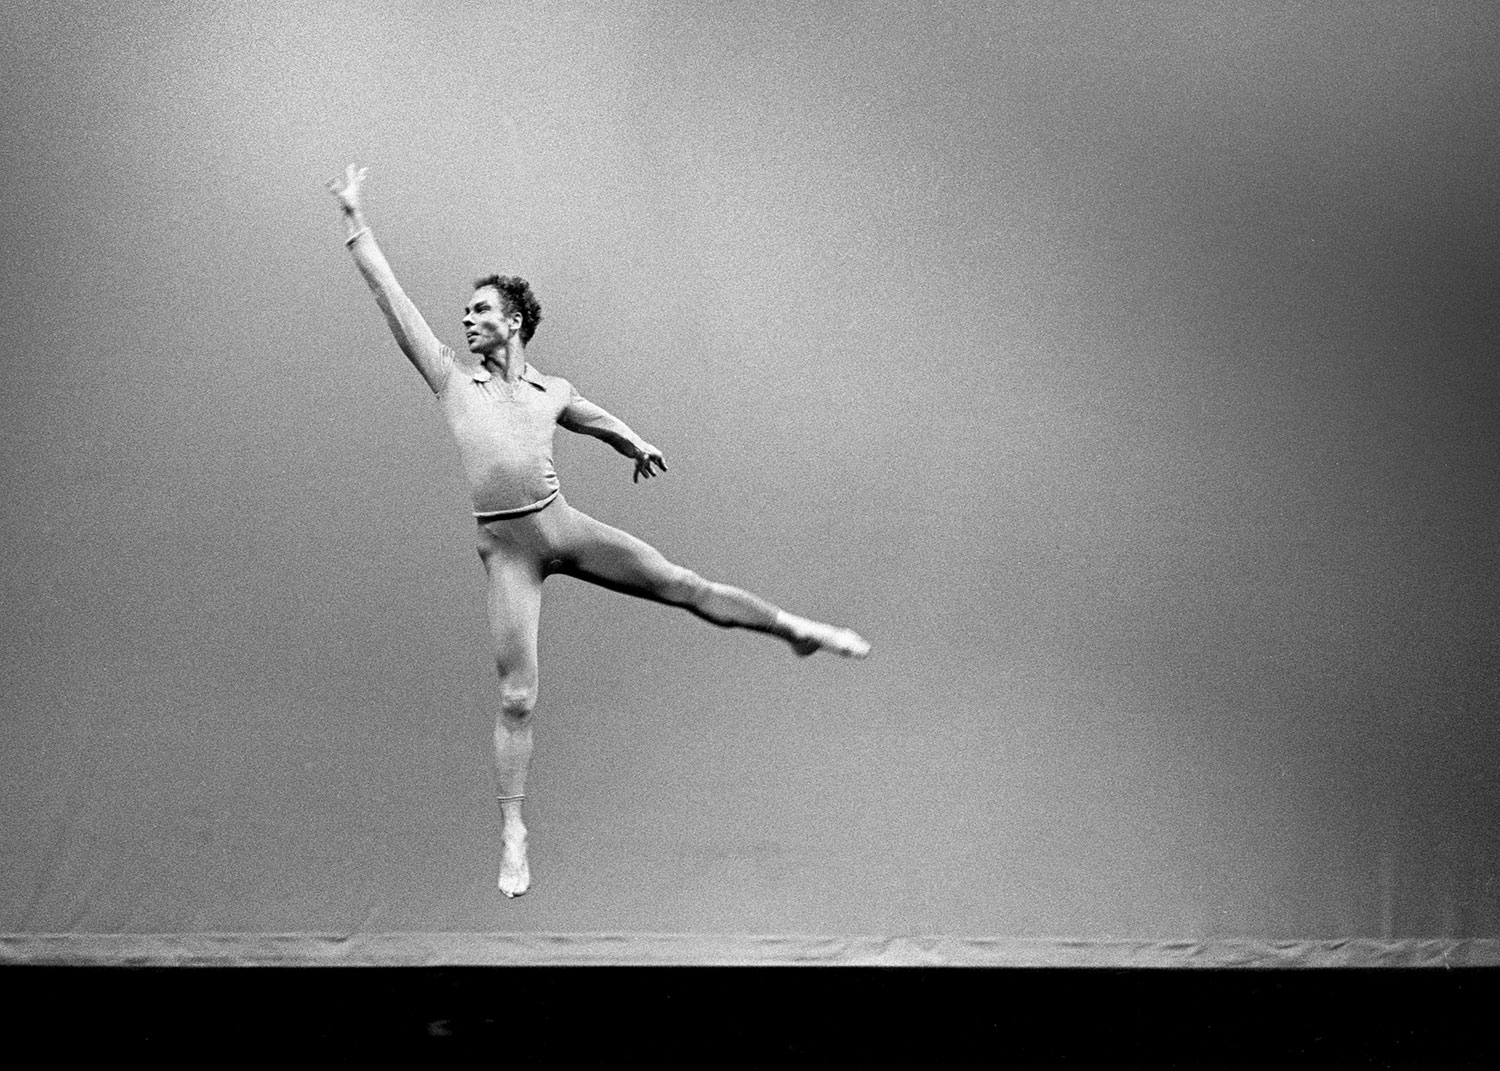  MERCE CUNNINGHAM   Airborne, in a performance of “Suite for Five”  at UCLA, 1963  